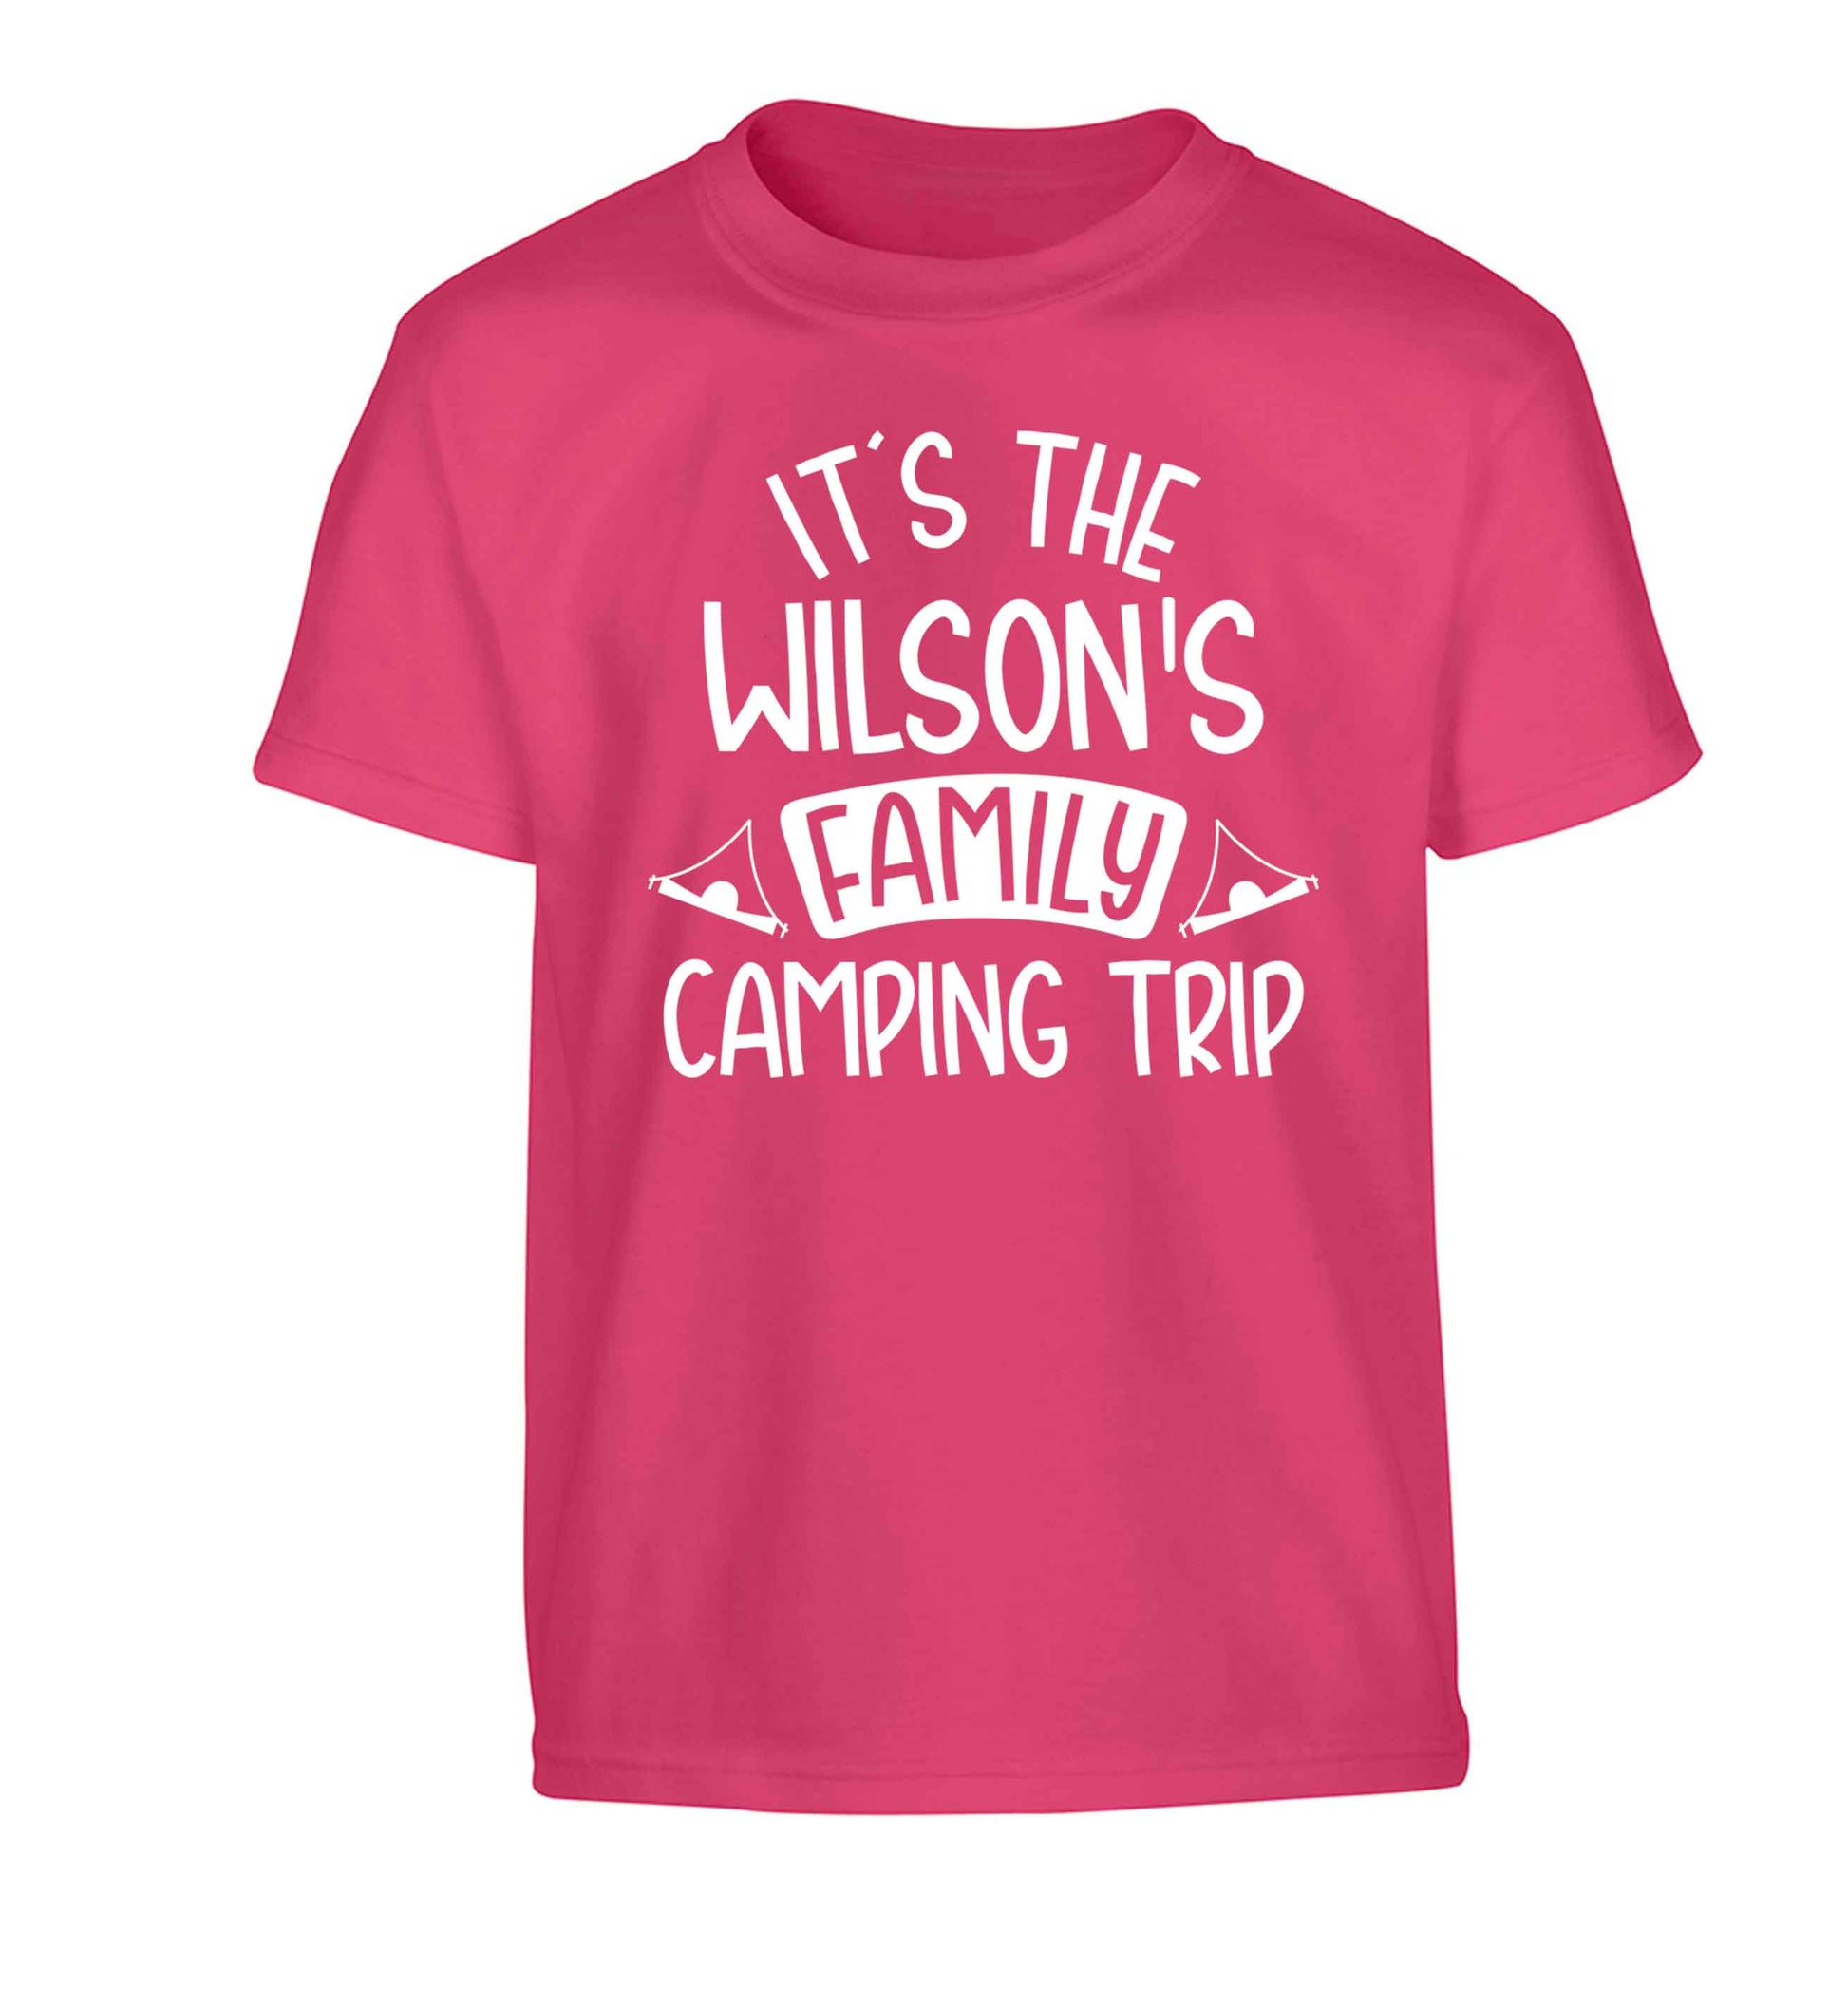 It's the Wilson's family camping trip personalised Children's pink Tshirt 12-13 Years